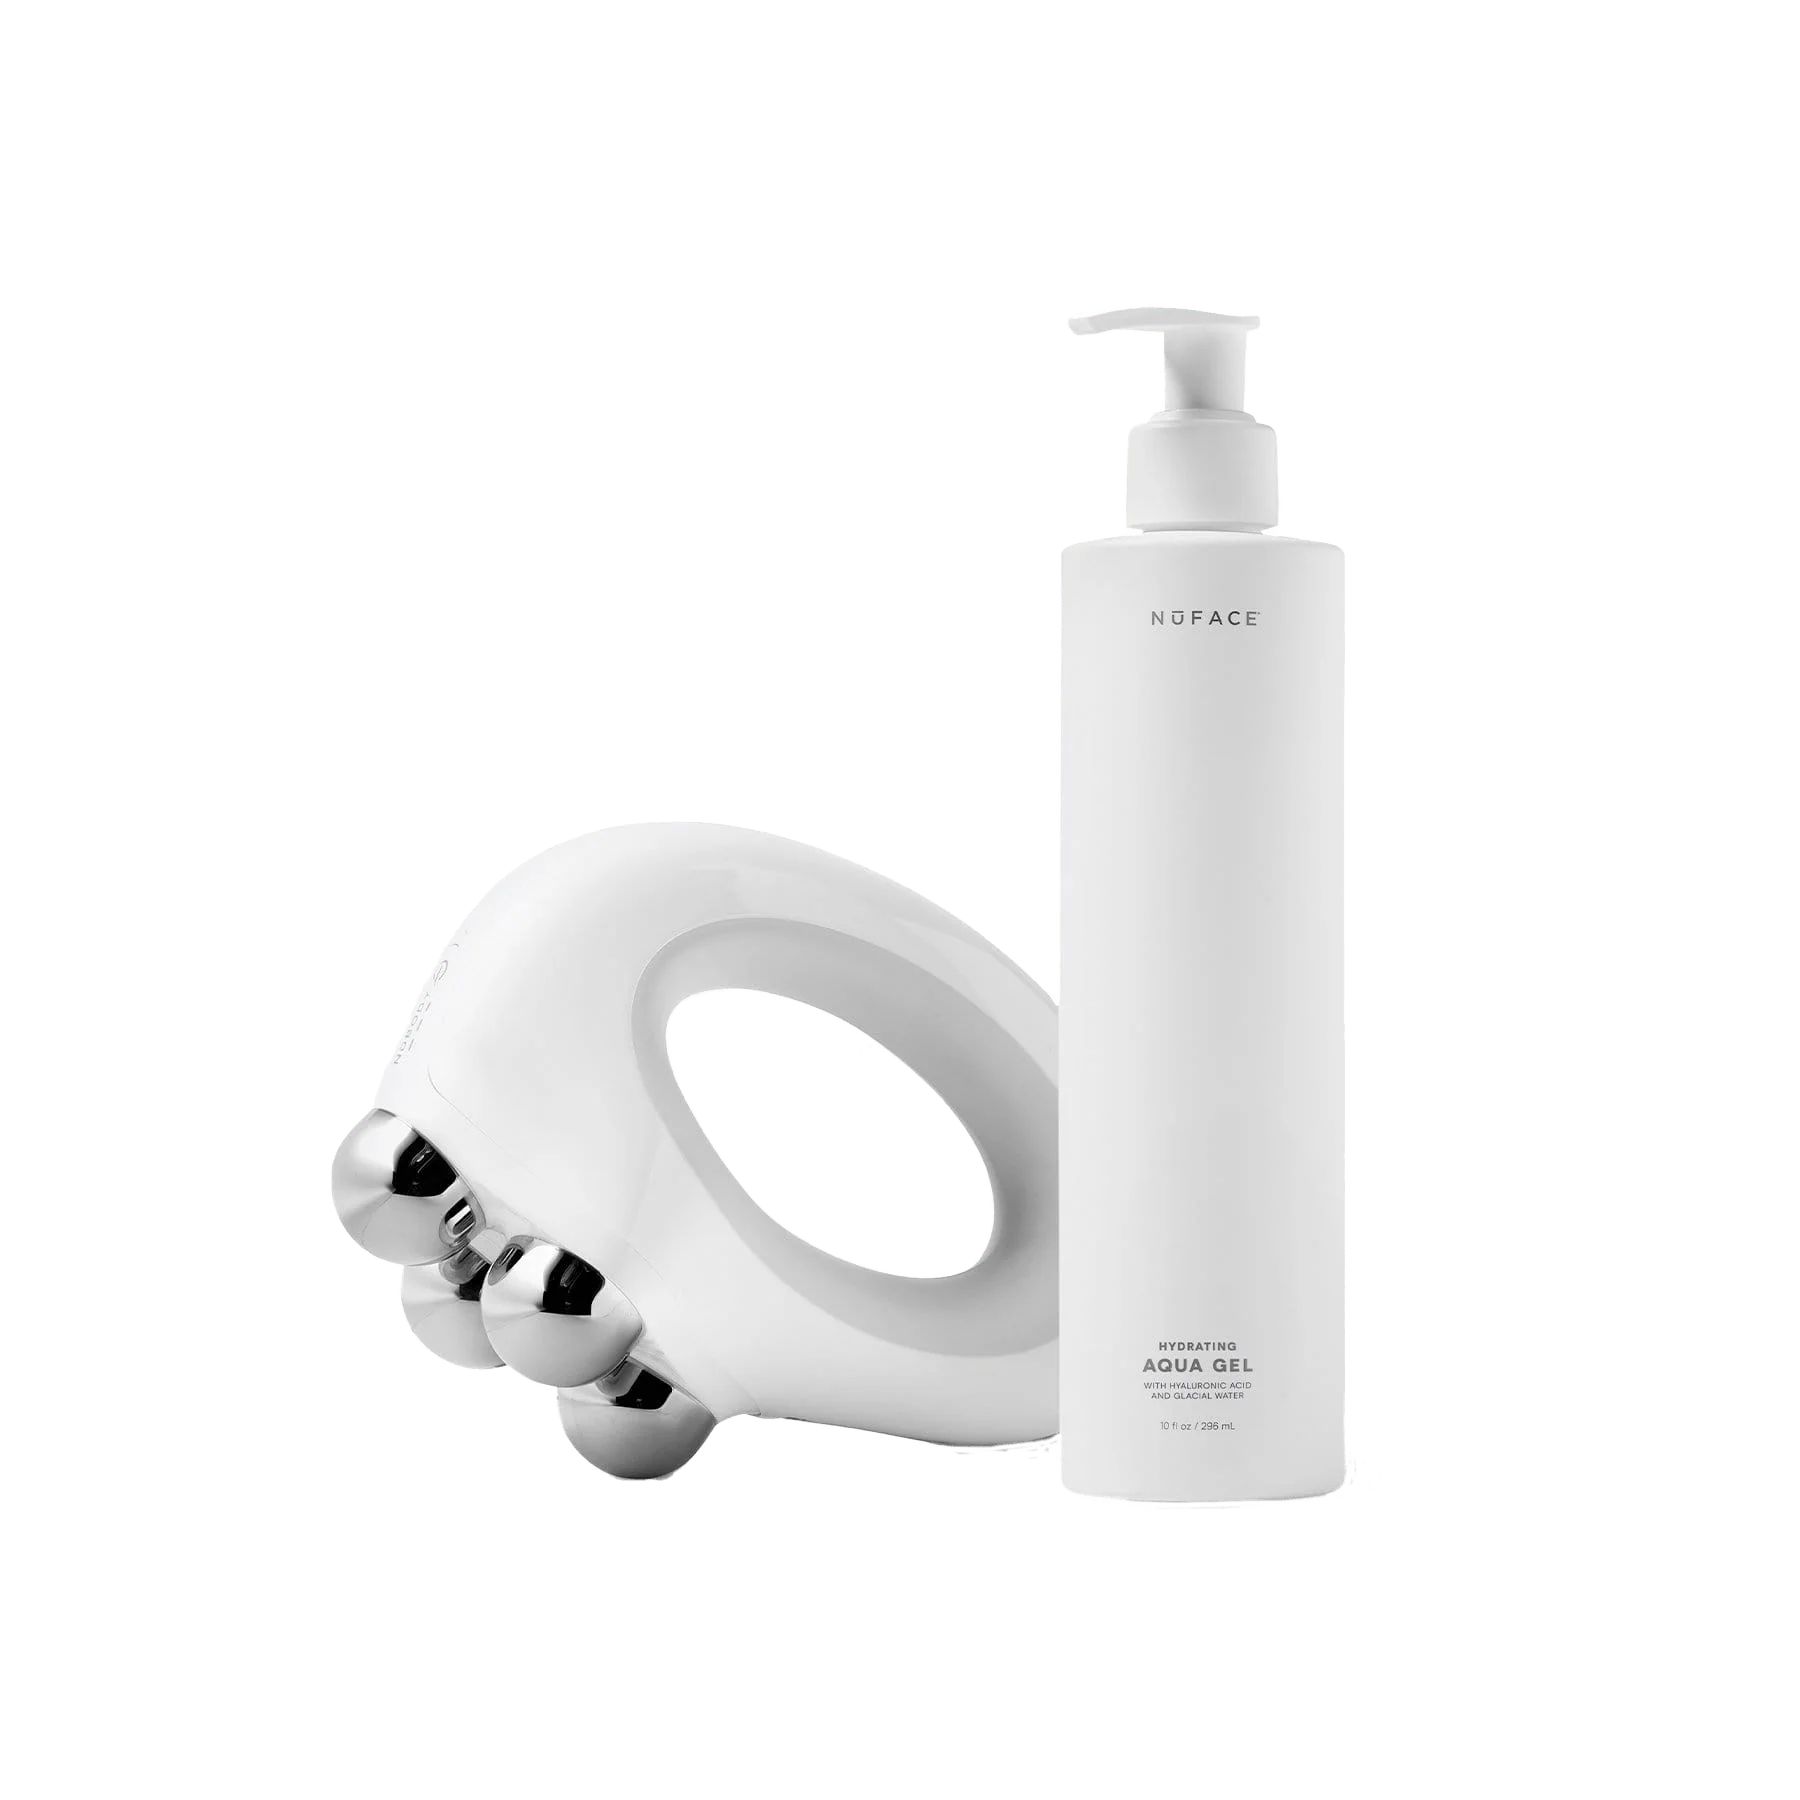 NuBODY Skin Toning Device, Reviews & Results | NuFACE | NuFace US